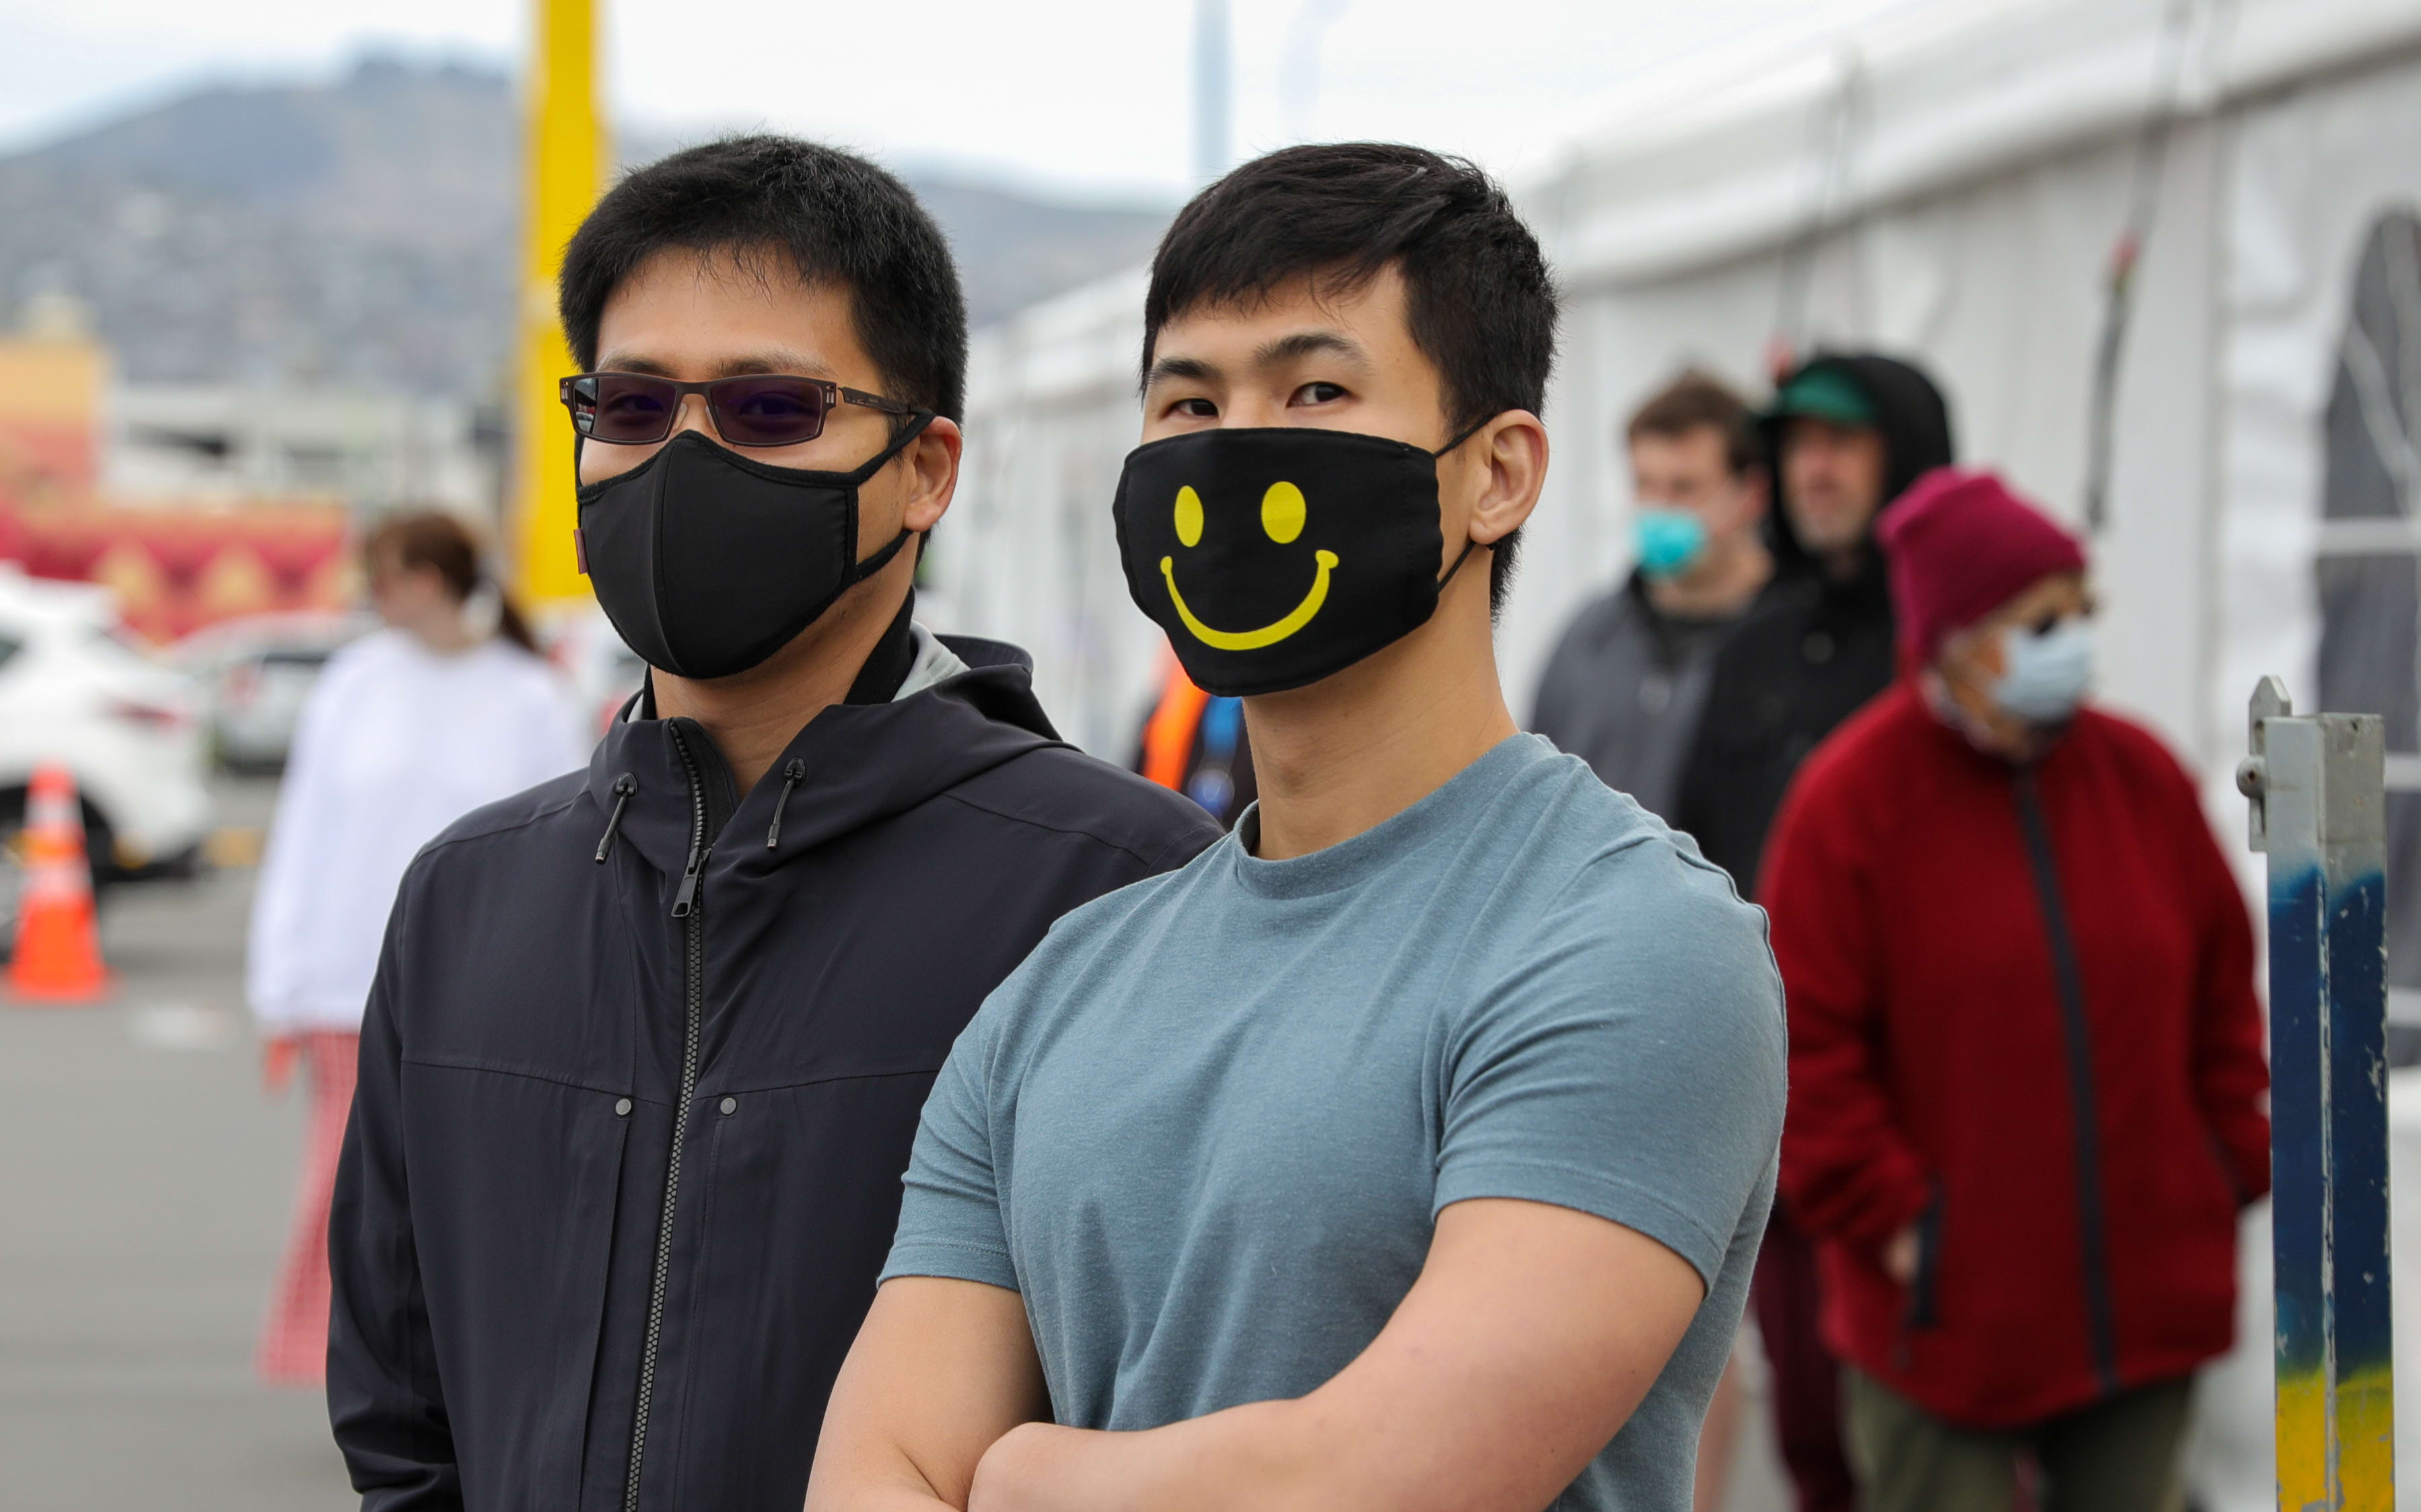 People wearing masks line up at Christchurch's mobile testing station for Covid-19 coronavirus at Pak n Save on Moorhouse Ave.